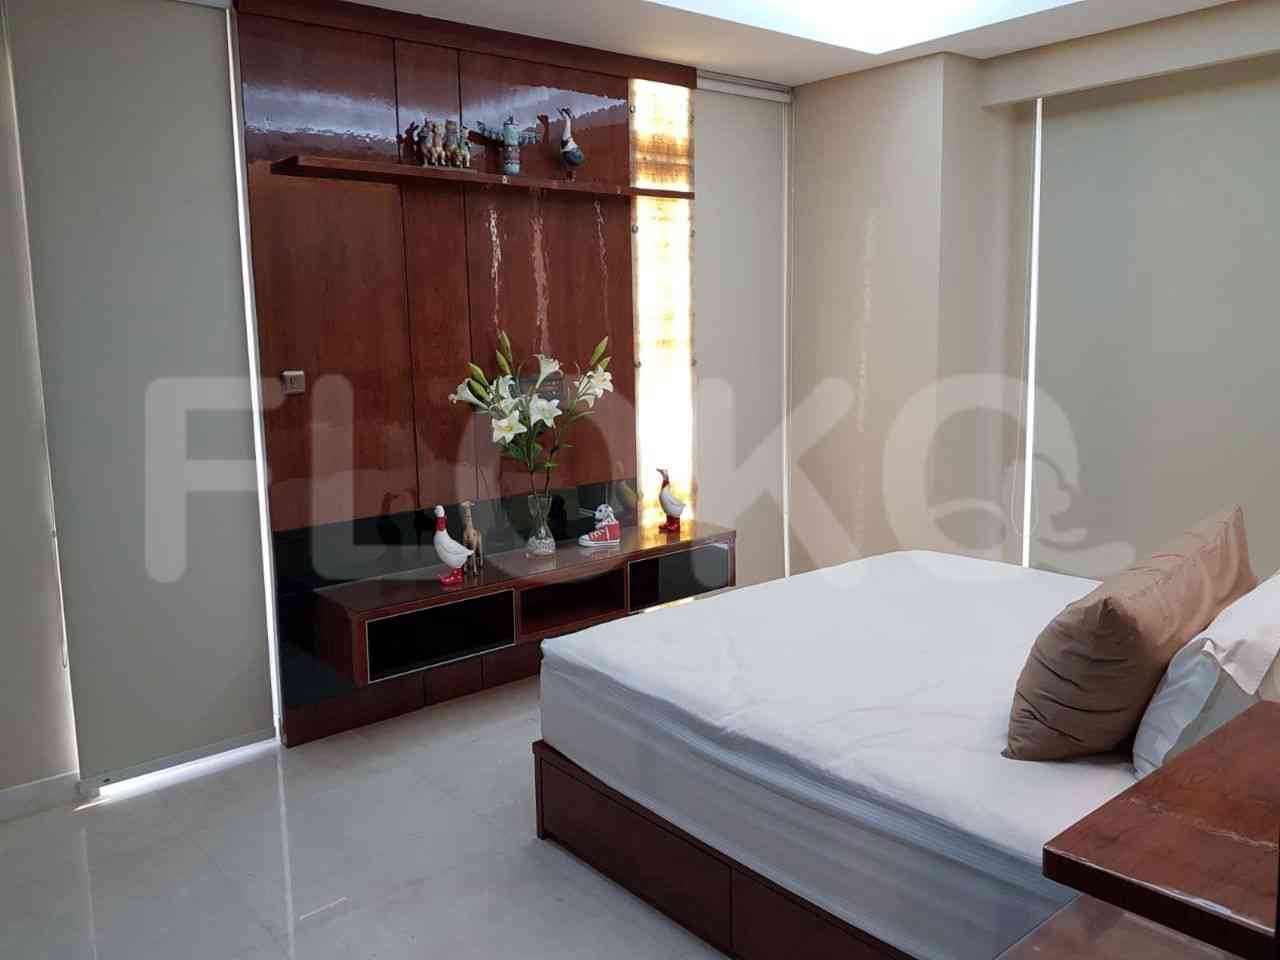 2 Bedroom on 17th Floor for Rent in Pondok Indah Residence - fpo7a5 3